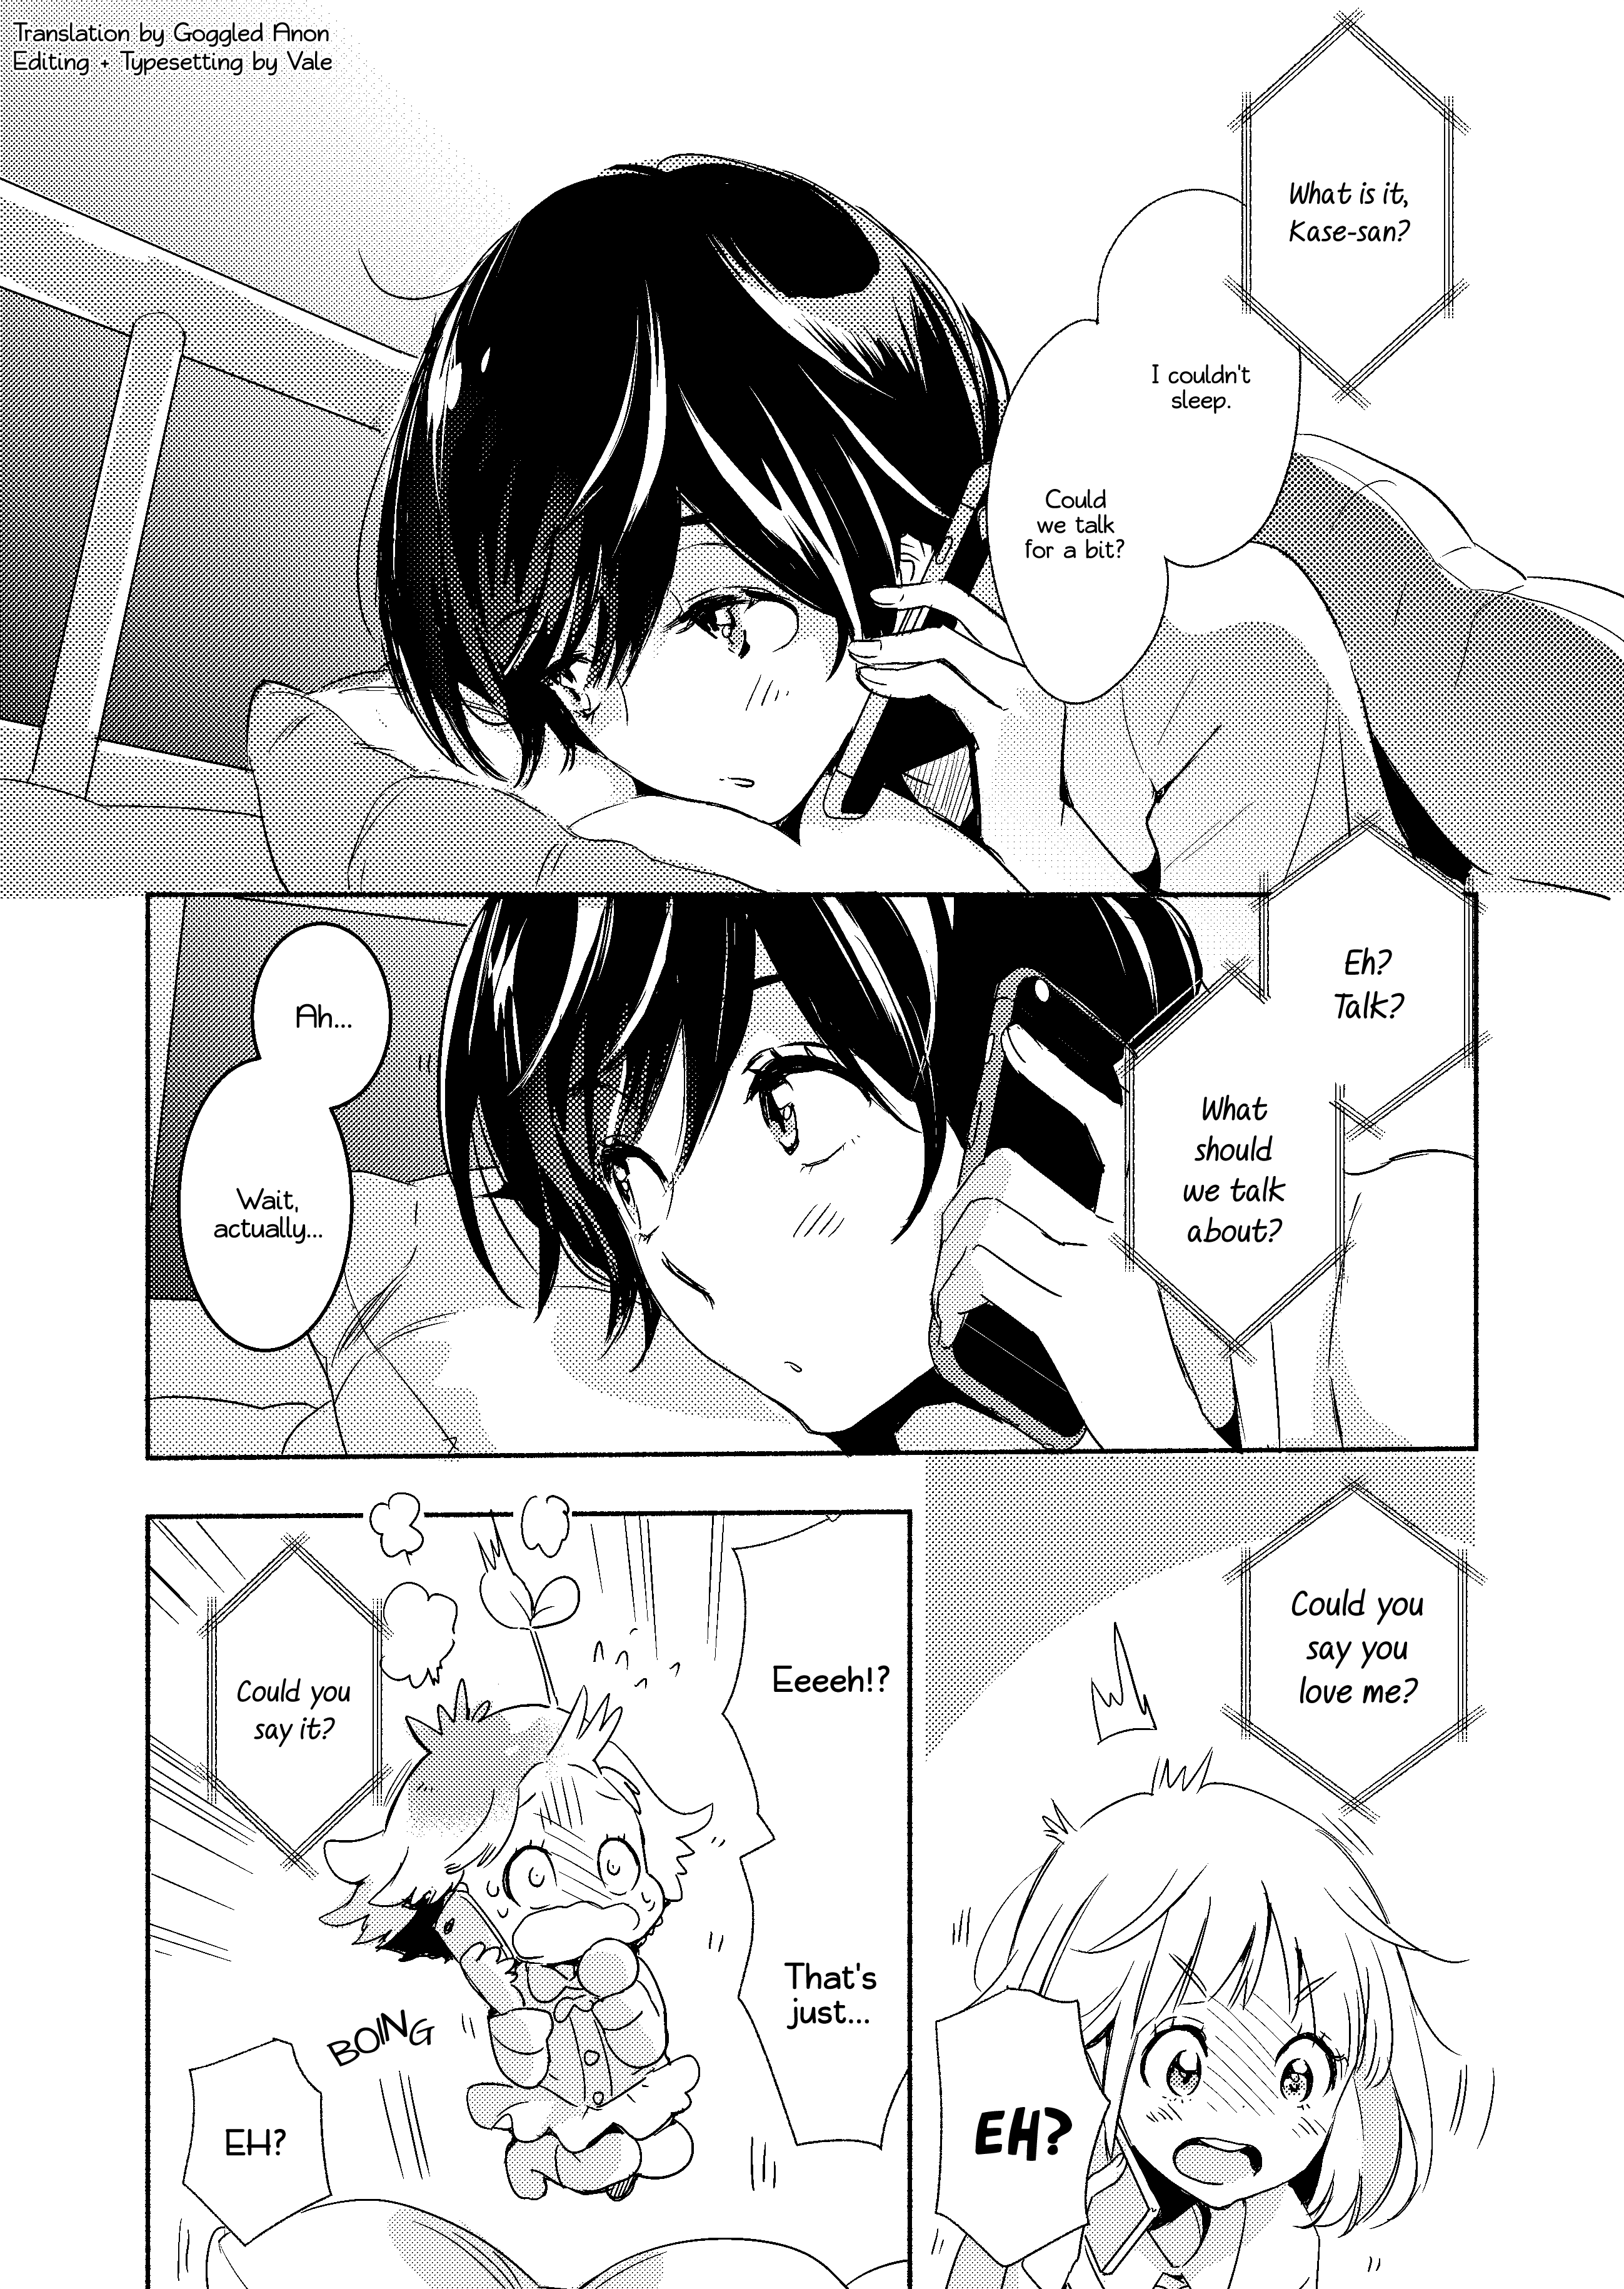 Yamada To Kase-San Chapter 13.5: Extra - Lights Out And Kase-San - Picture 2